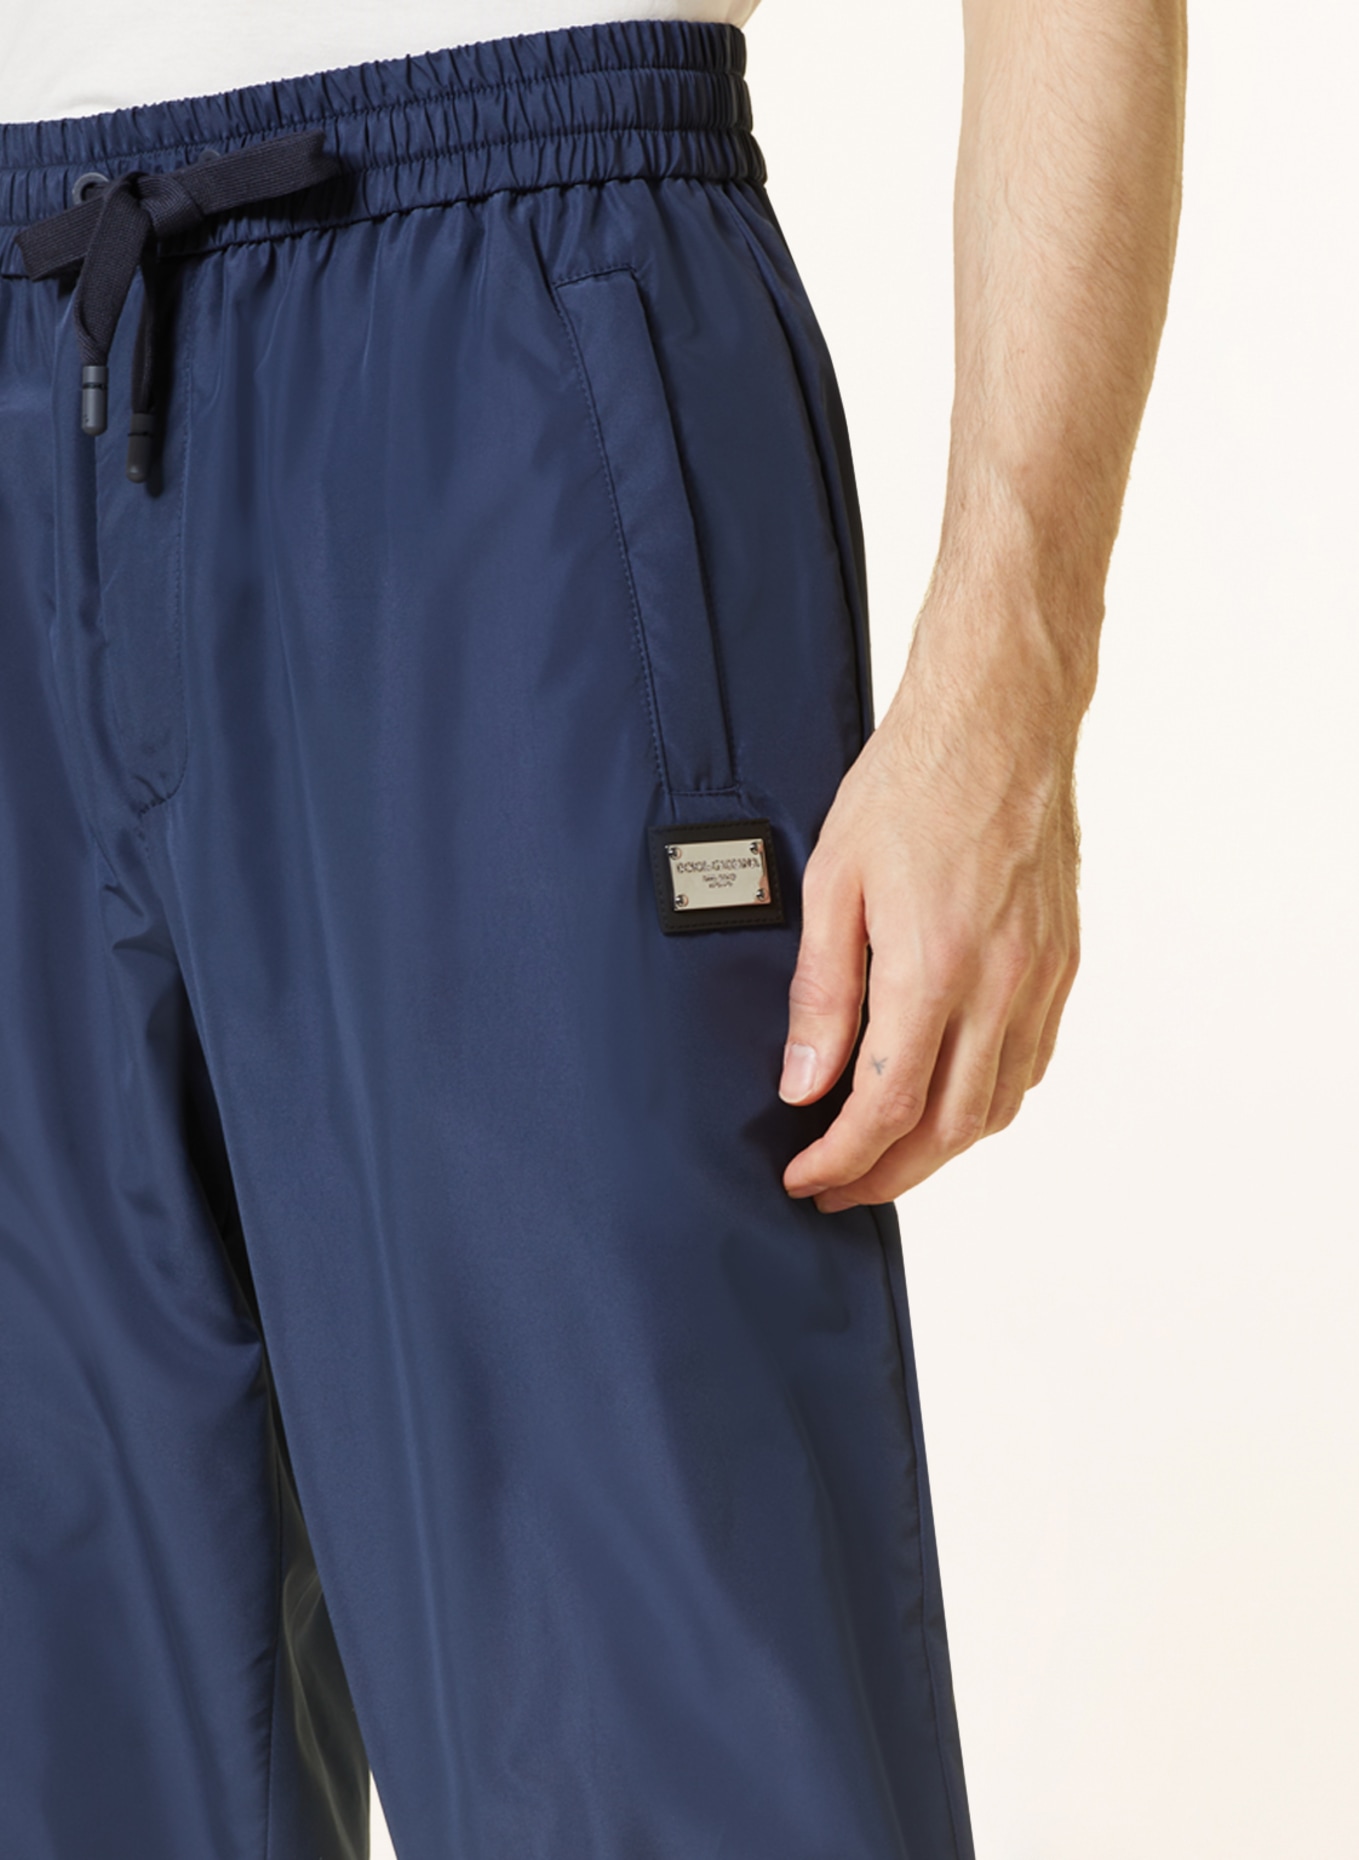 DOLCE & GABBANA Pants in jogger style, Color: DARK BLUE (Image 5)